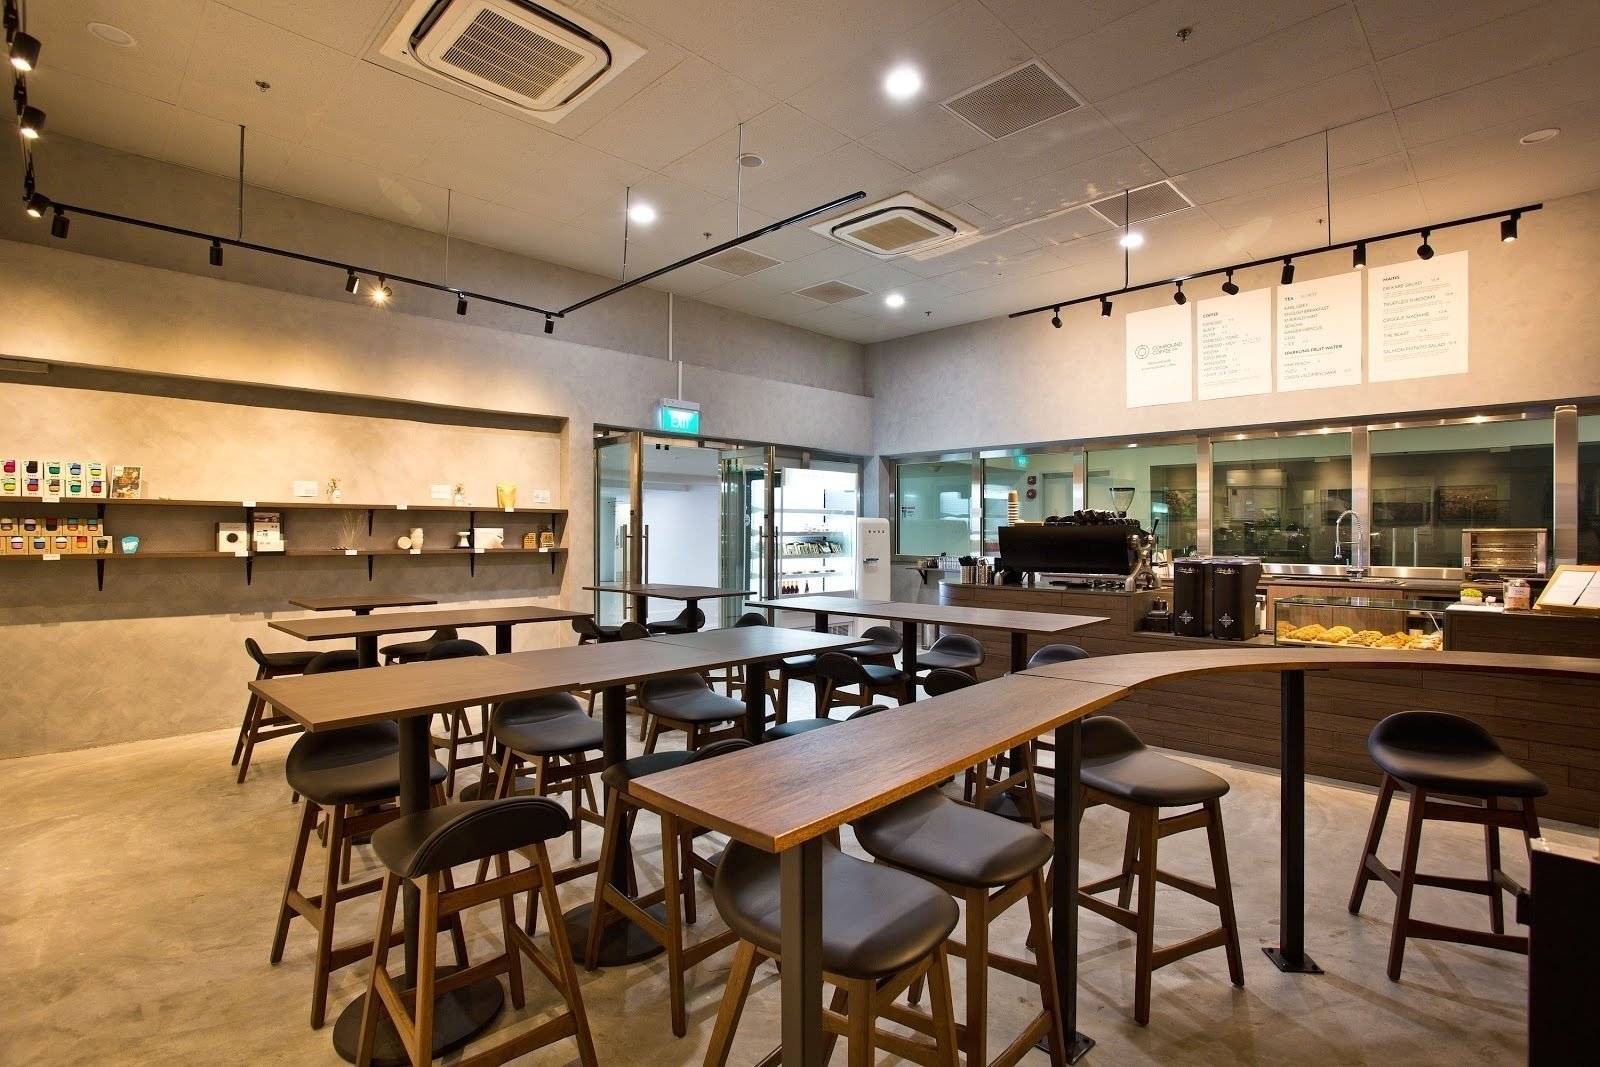 <span class="translation_missing" title="translation missing: en.meta.location_title, location_name: Compound Coffee Co., city: Singapore">Location Title</span>